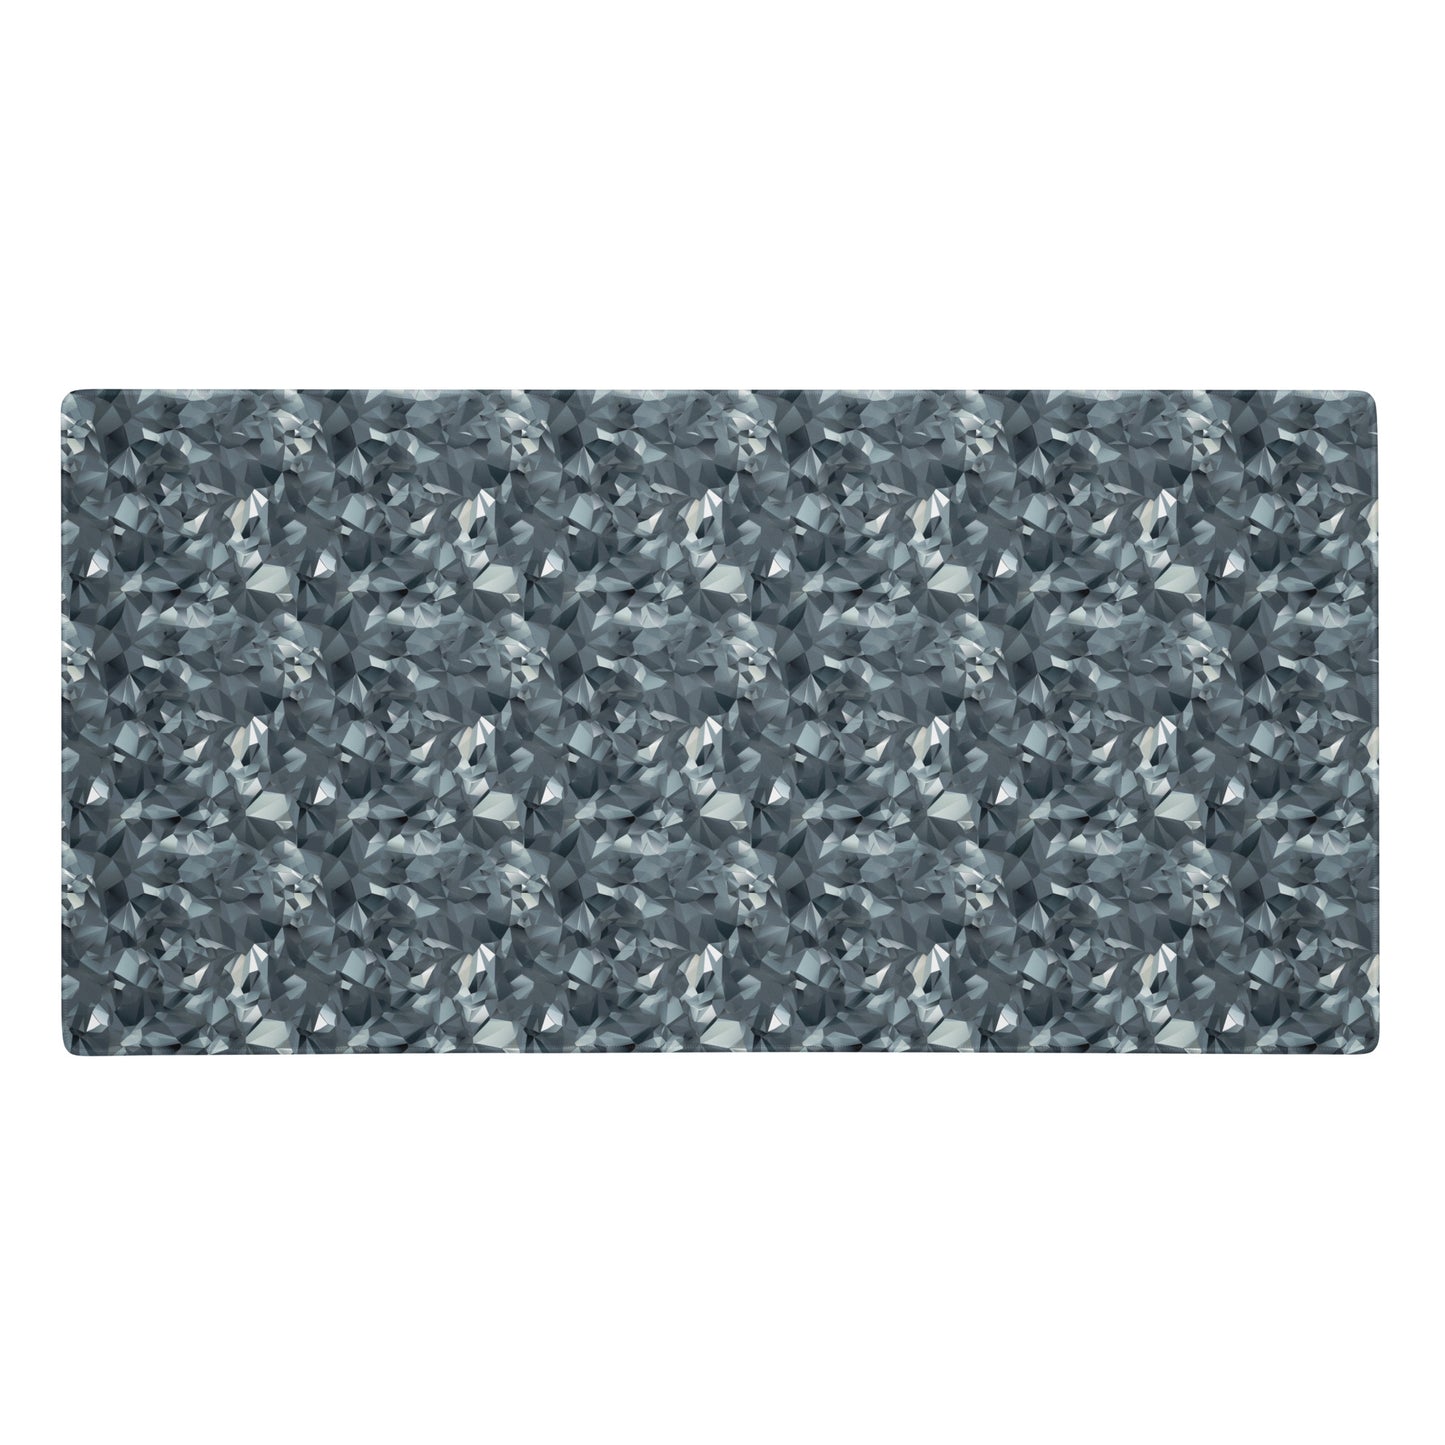 A 36" x 18" gaming desk pad with gray crystals.